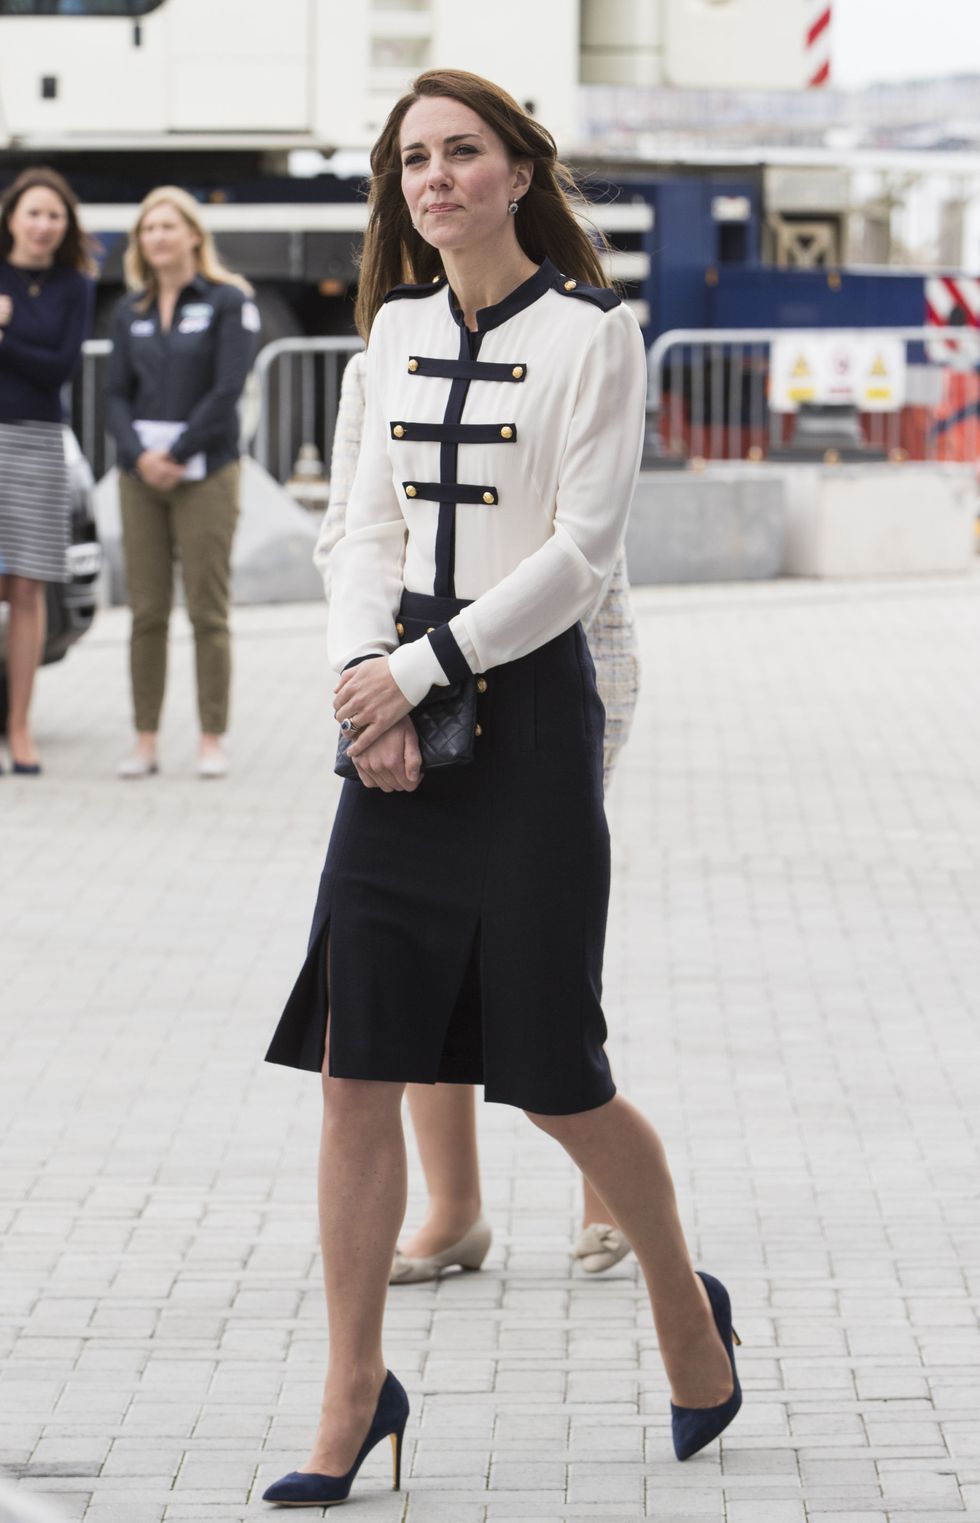 Kate Middleton's shoes